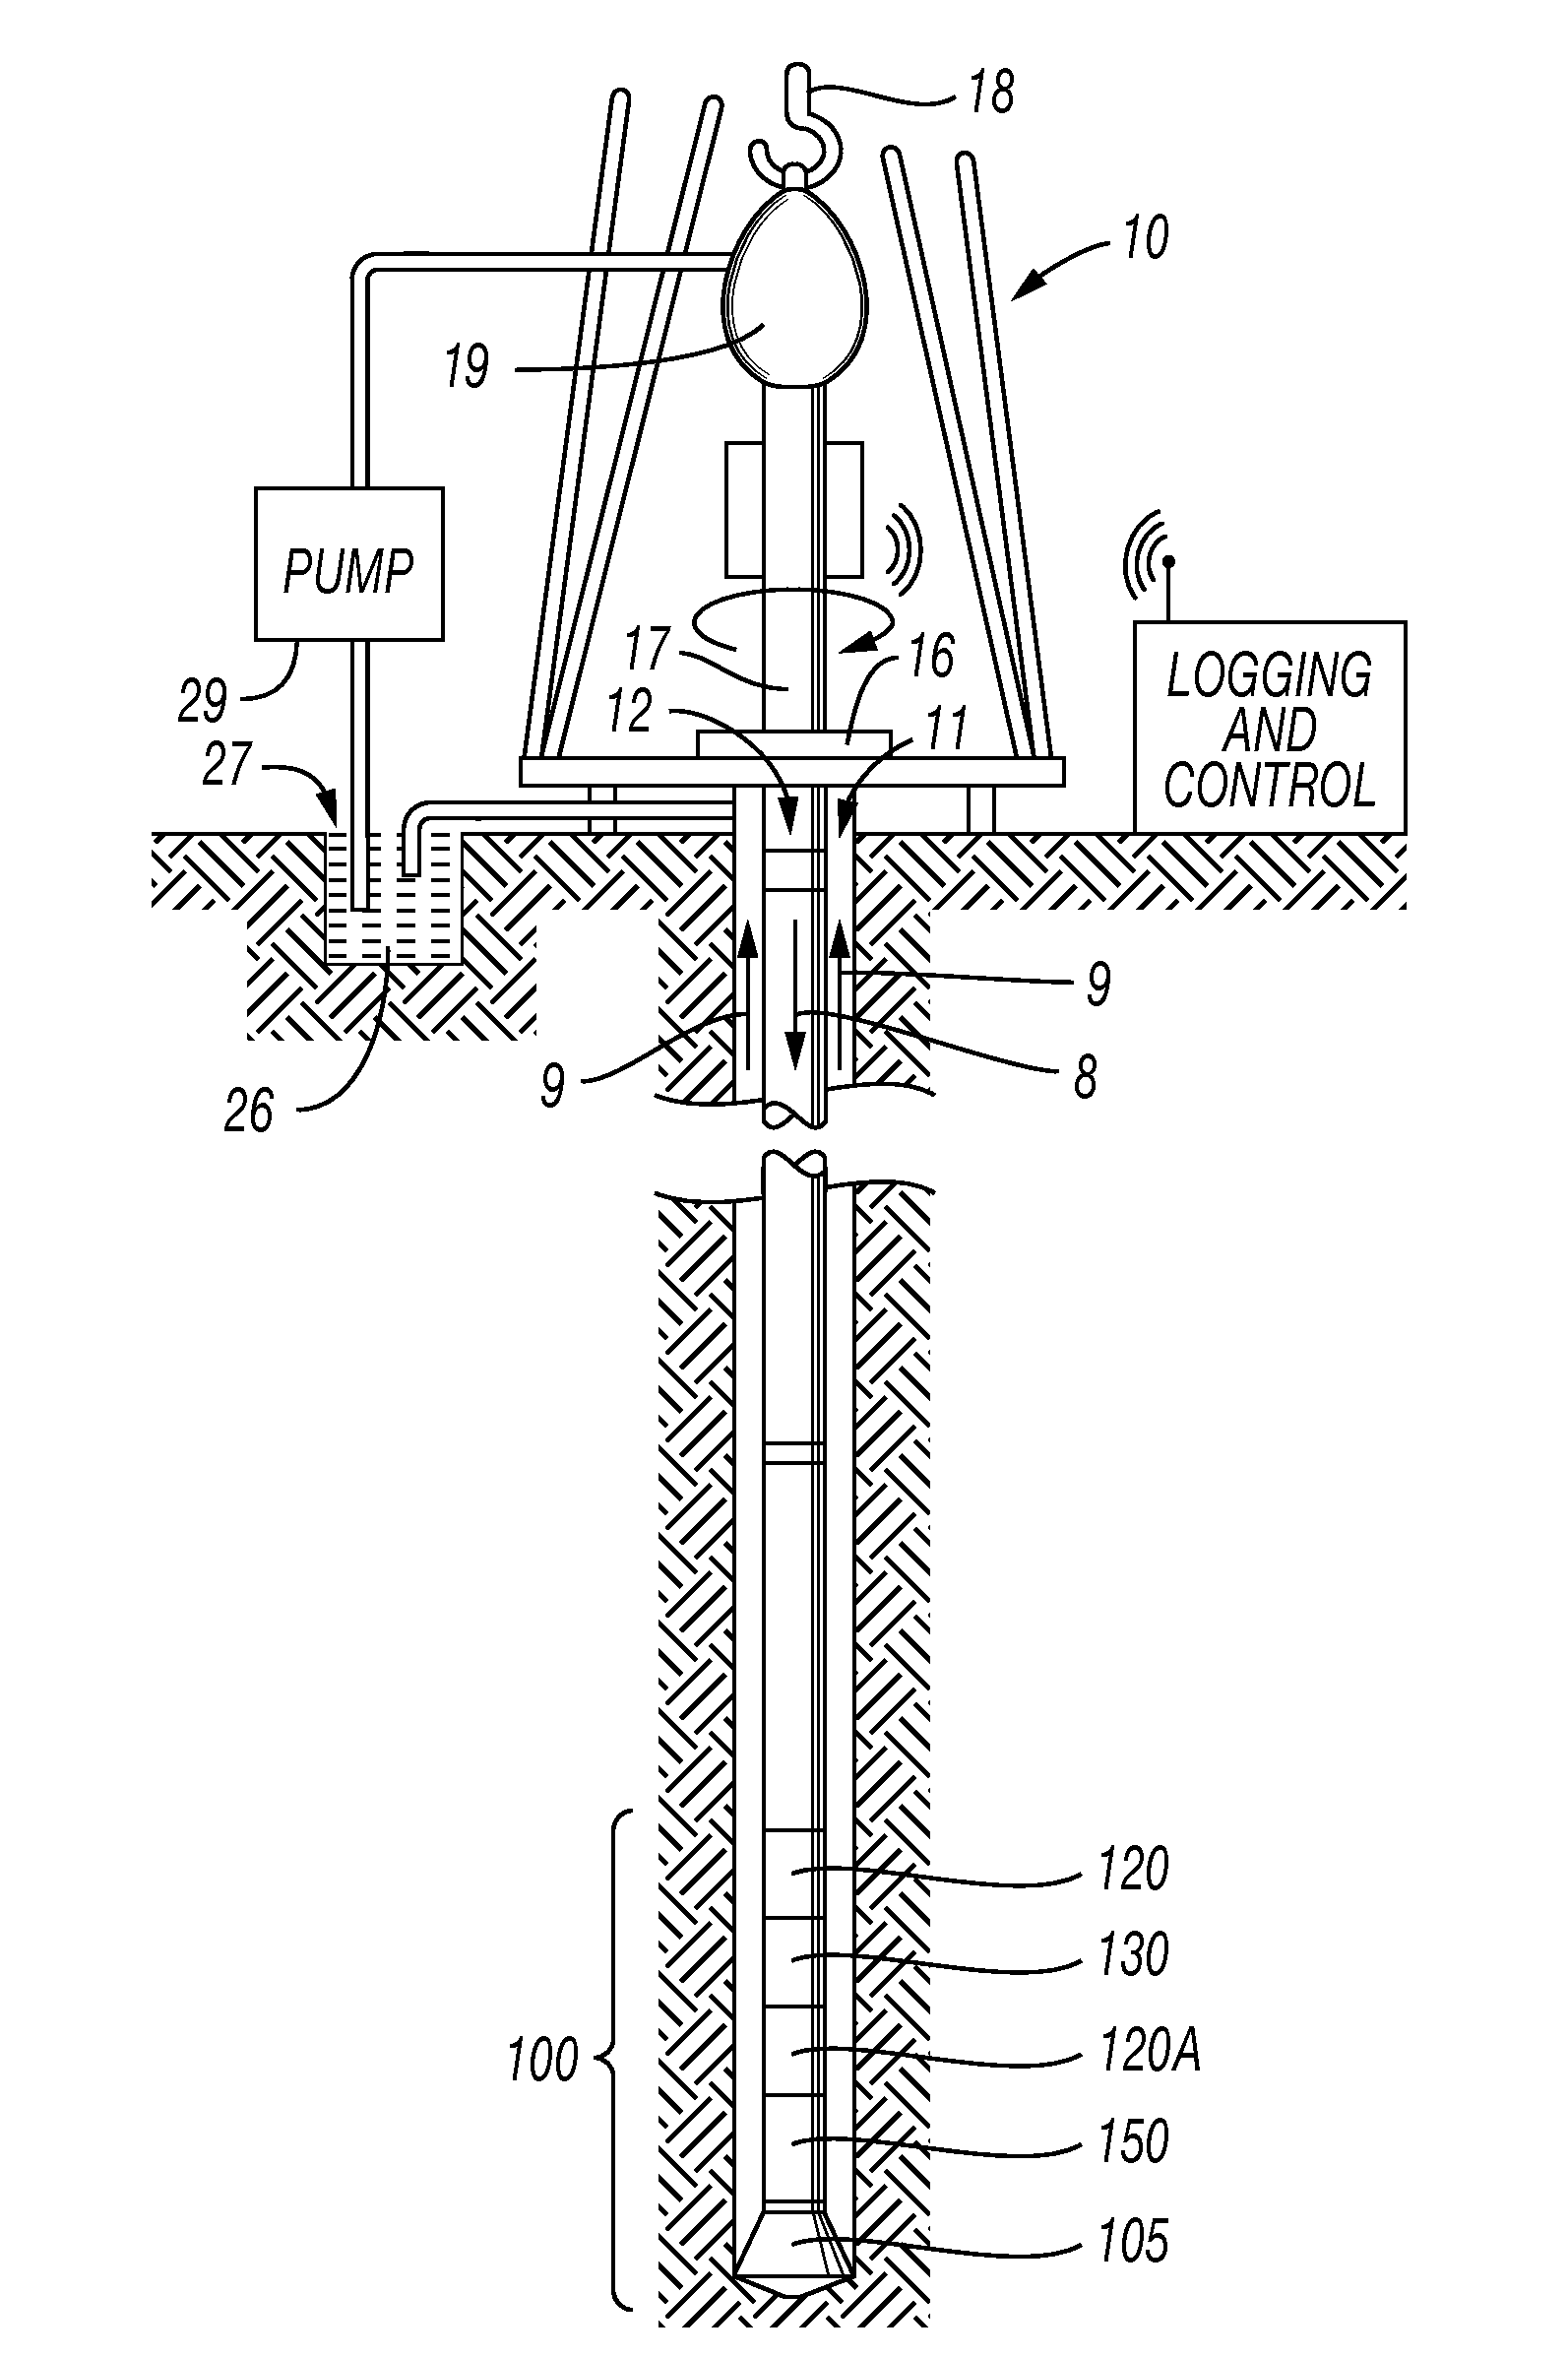 Non-rotating logging-while-drilling neutron imaging tool